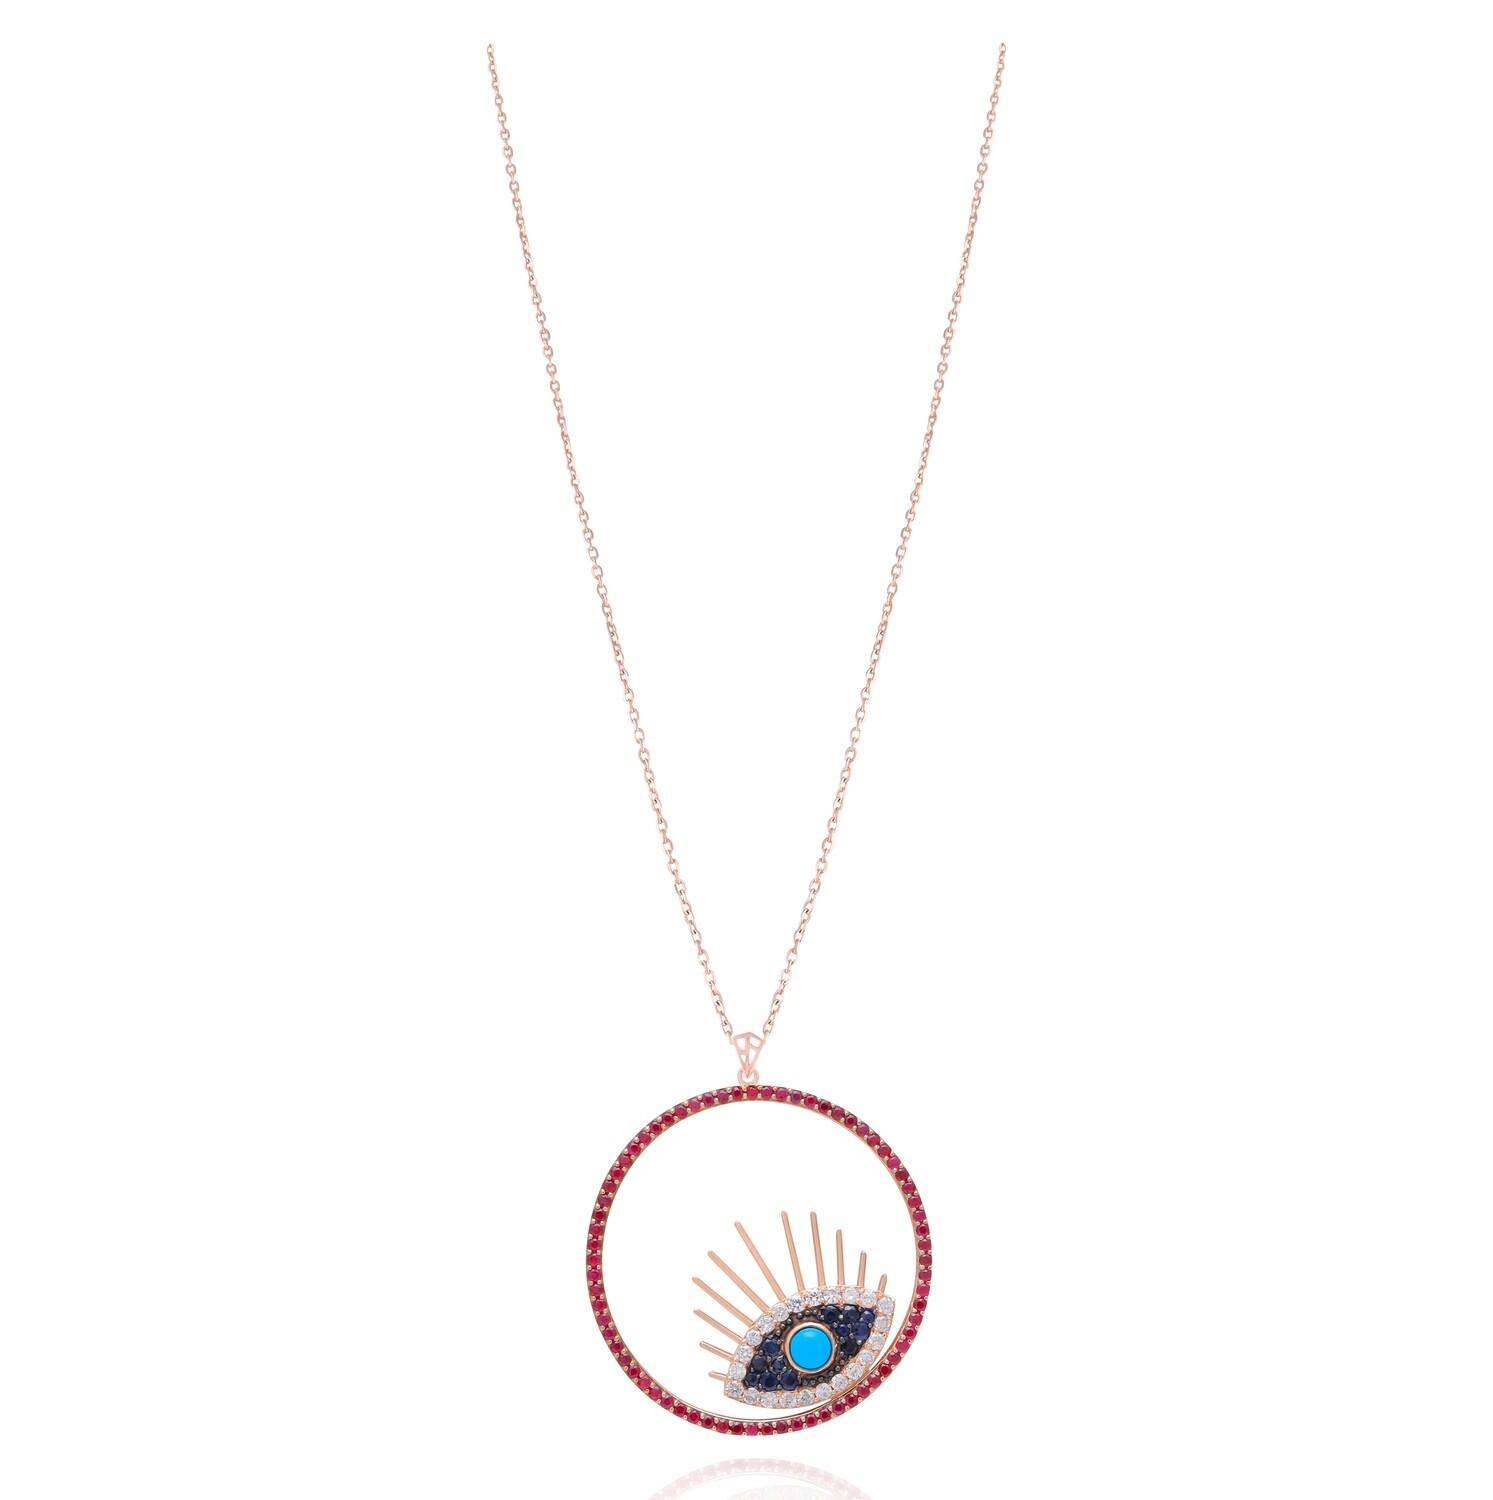 Eternal Diamond Eye Necklace with Roby, Sapphire Precious Colored Stone